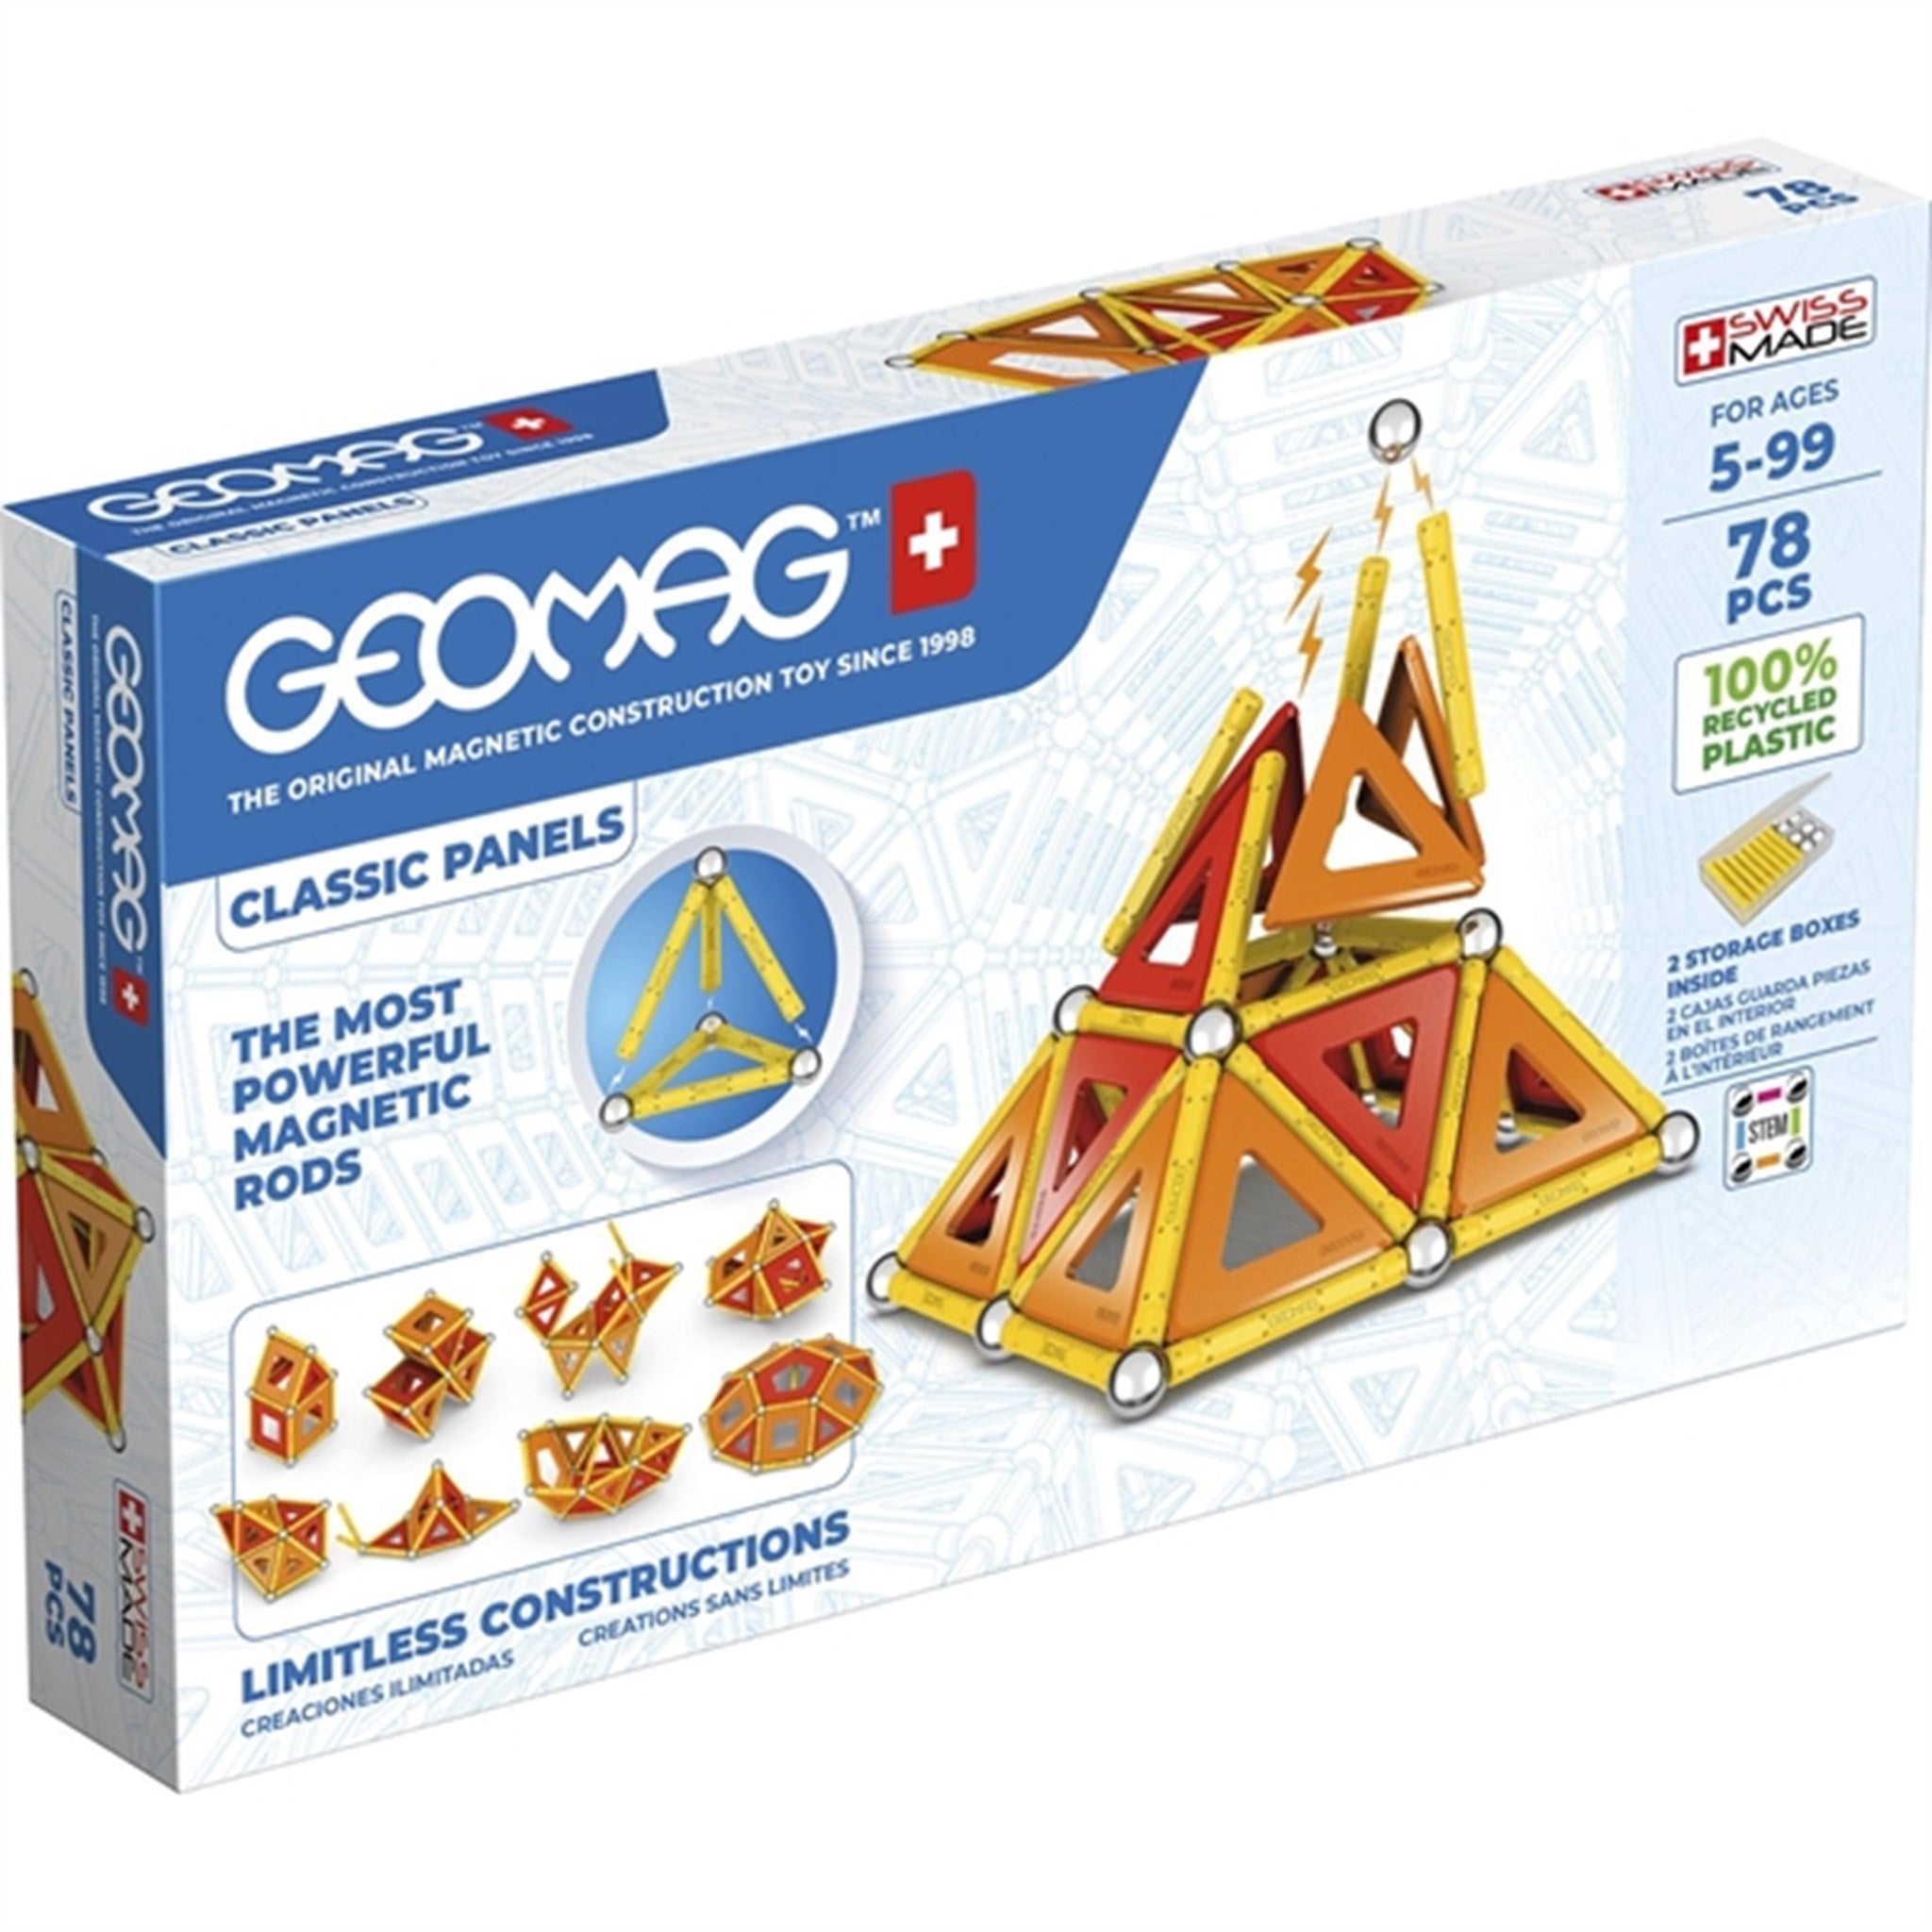 Geomag Classic Panels Recycled 78 pcs